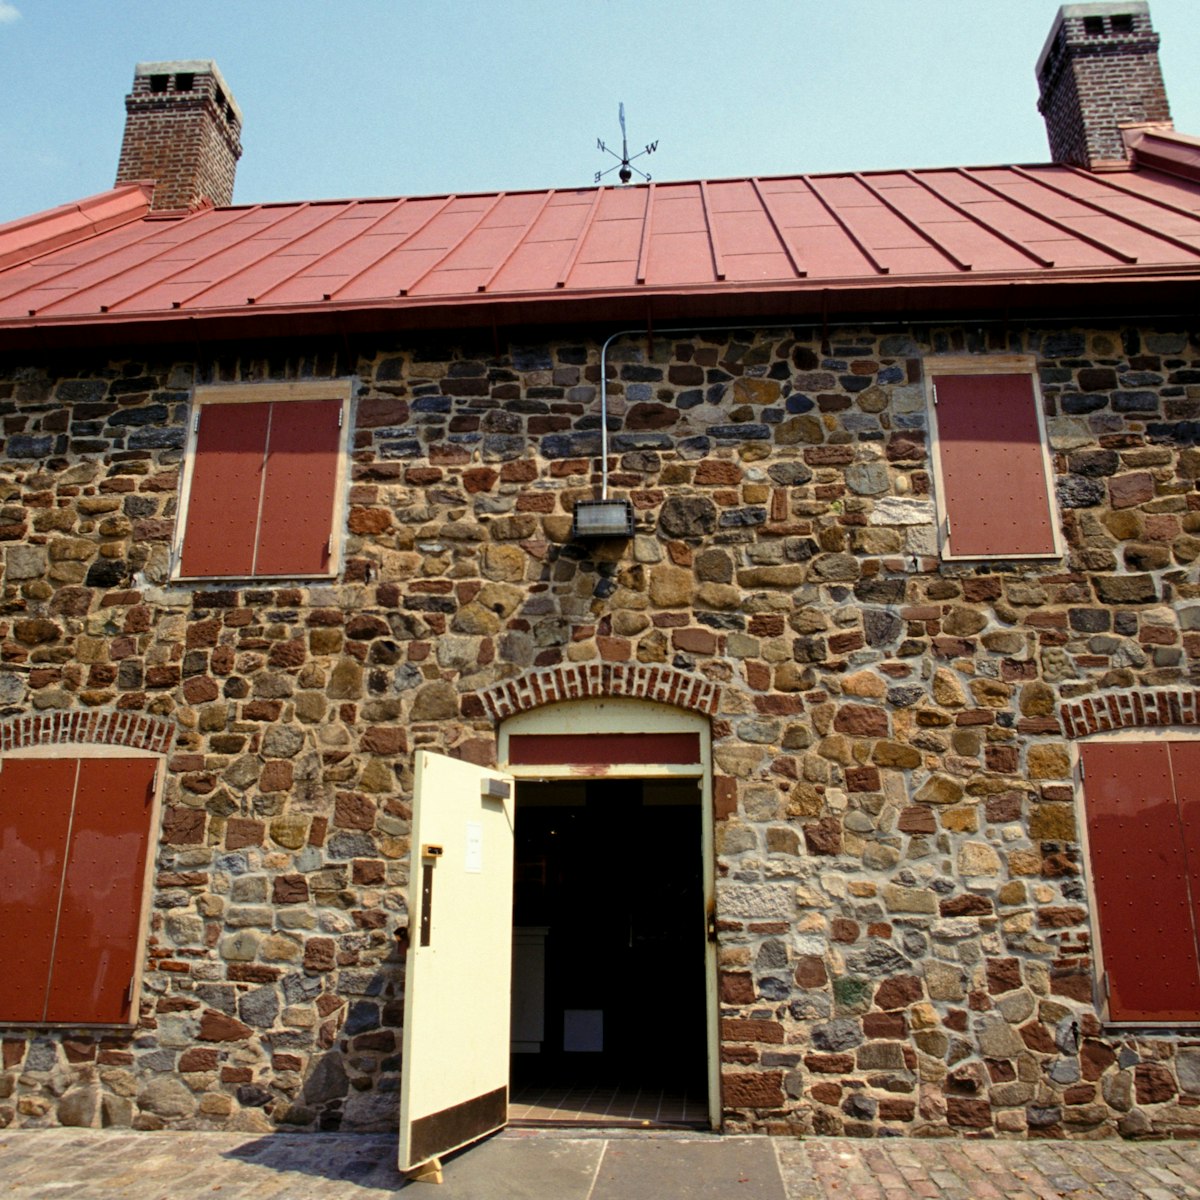 New York, New York, Brooklyn, The Old Stone House, Replica Of Original From Revolutionary War. (Photo by Education Images/UIG via Getty Images)